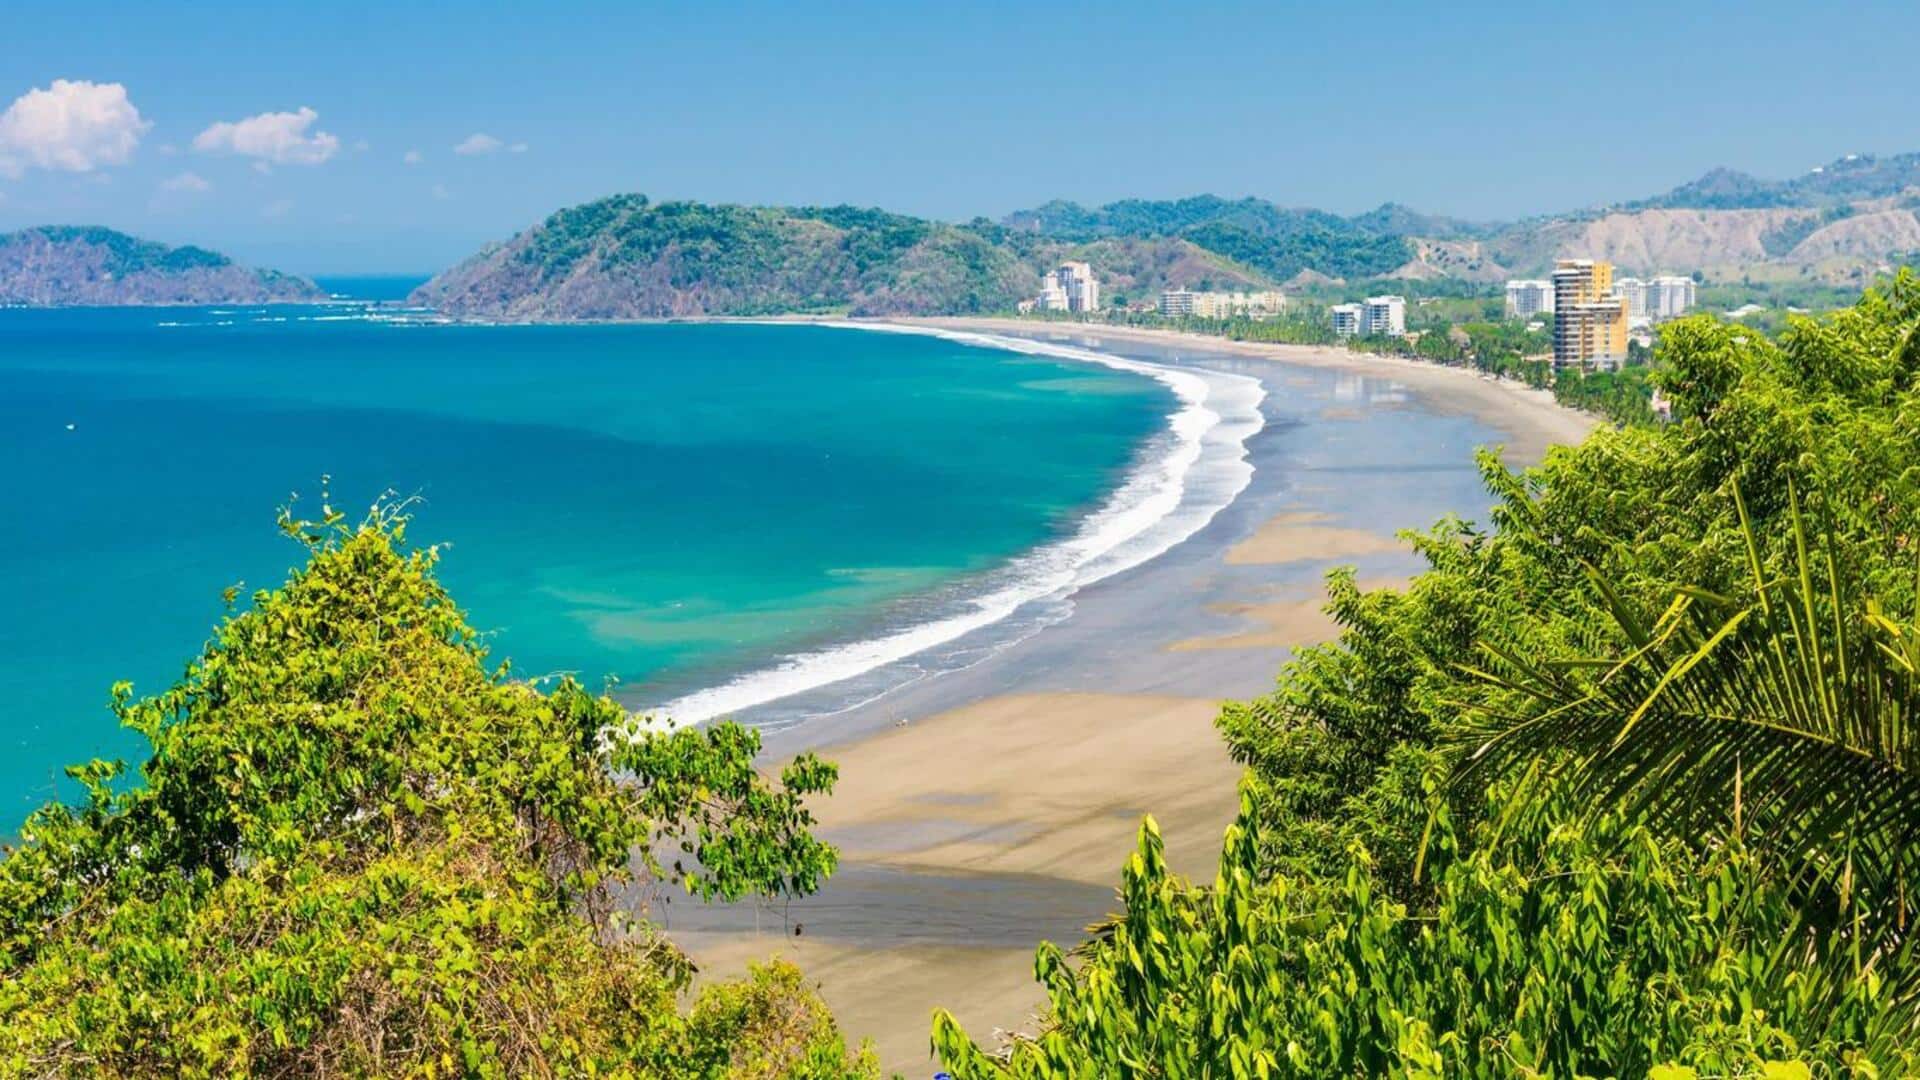 Discover Costa Rica's natural wonders with this things-to-do guide